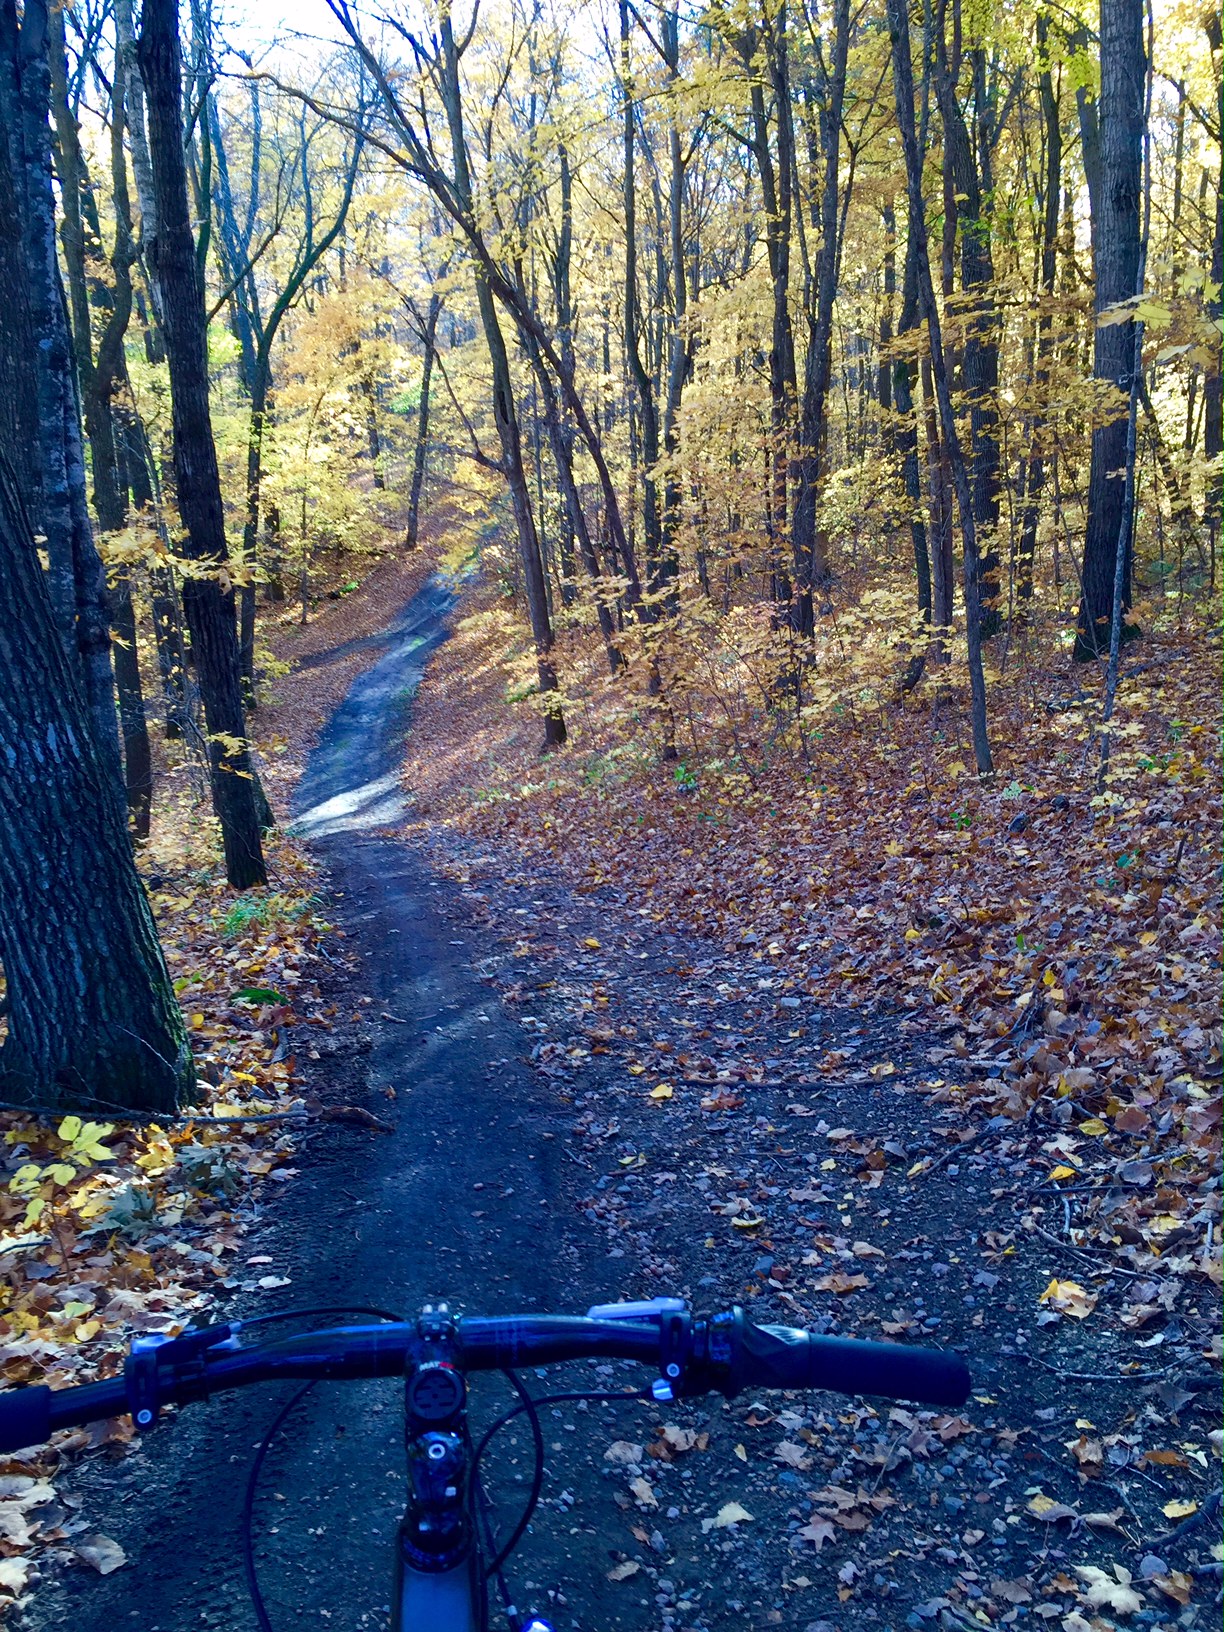 Freshly cleared trail on the mountain bike course. October 13th, 2015.